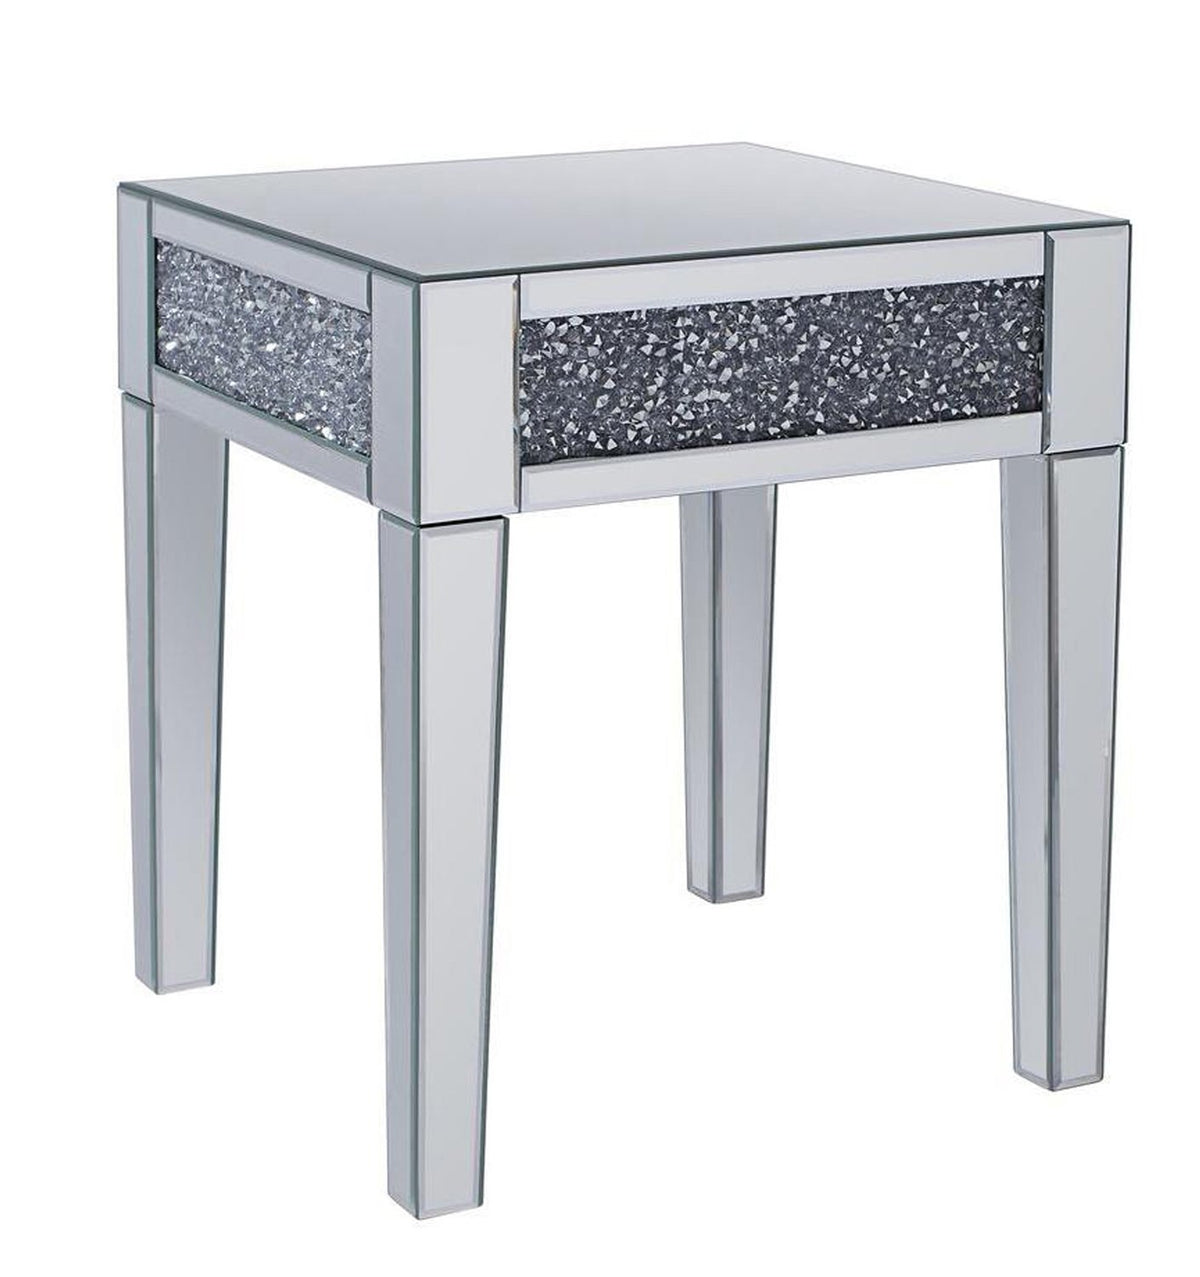 Mirror Insert End Table with Faux Diamond Inlay and Tapered Legs, Silver - BM195942